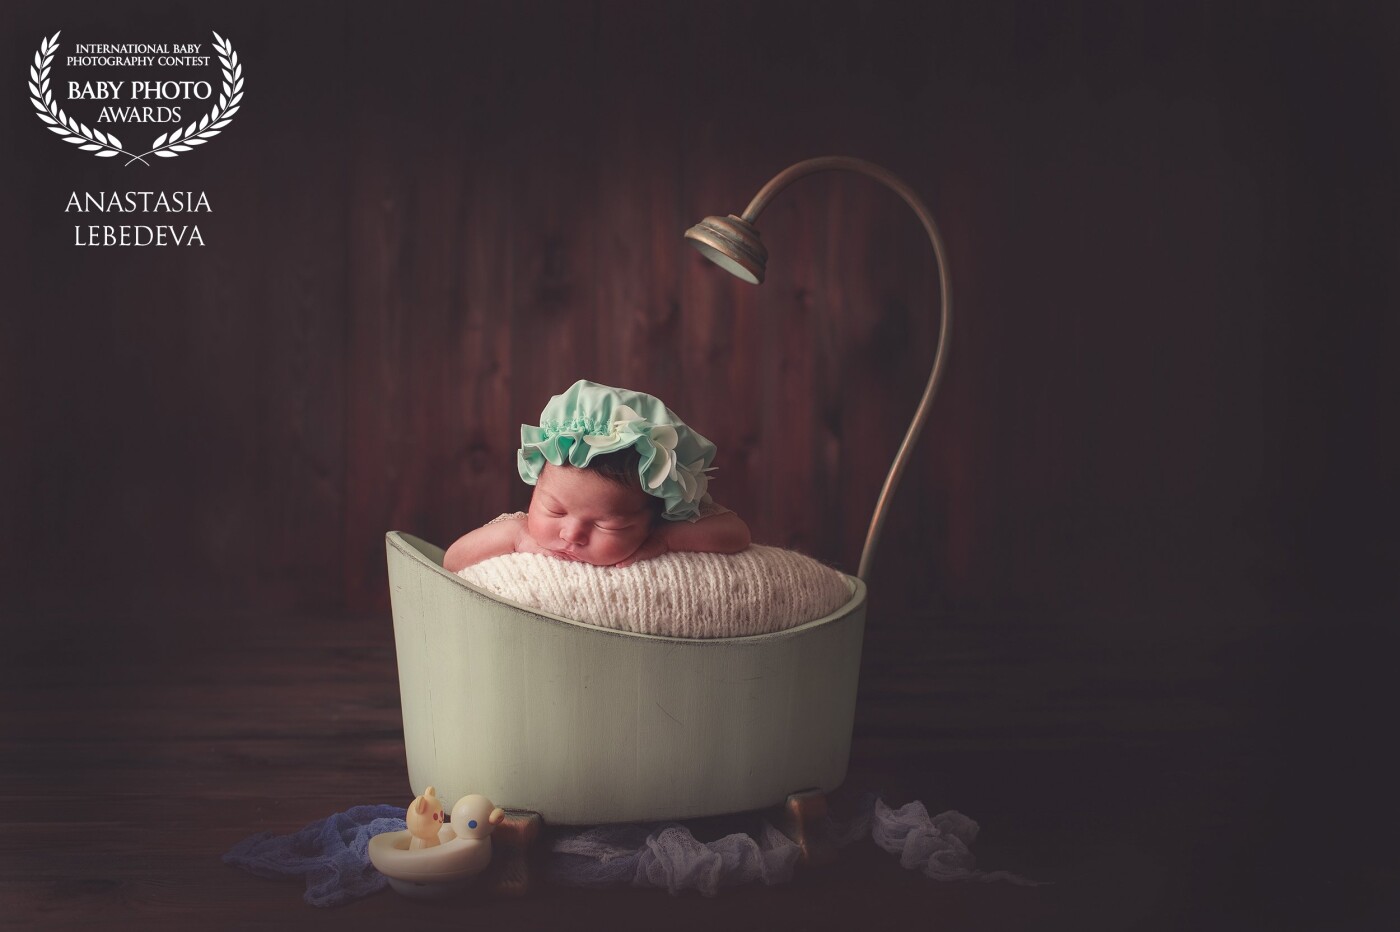 In this photo, little Lady, who is 12 days old, she is taking a bath! Perhaps she is dreaming about something delicious ...? maybe about desserts or a cup of hot chocolate? or.........????? We dream together)) It's so nice!